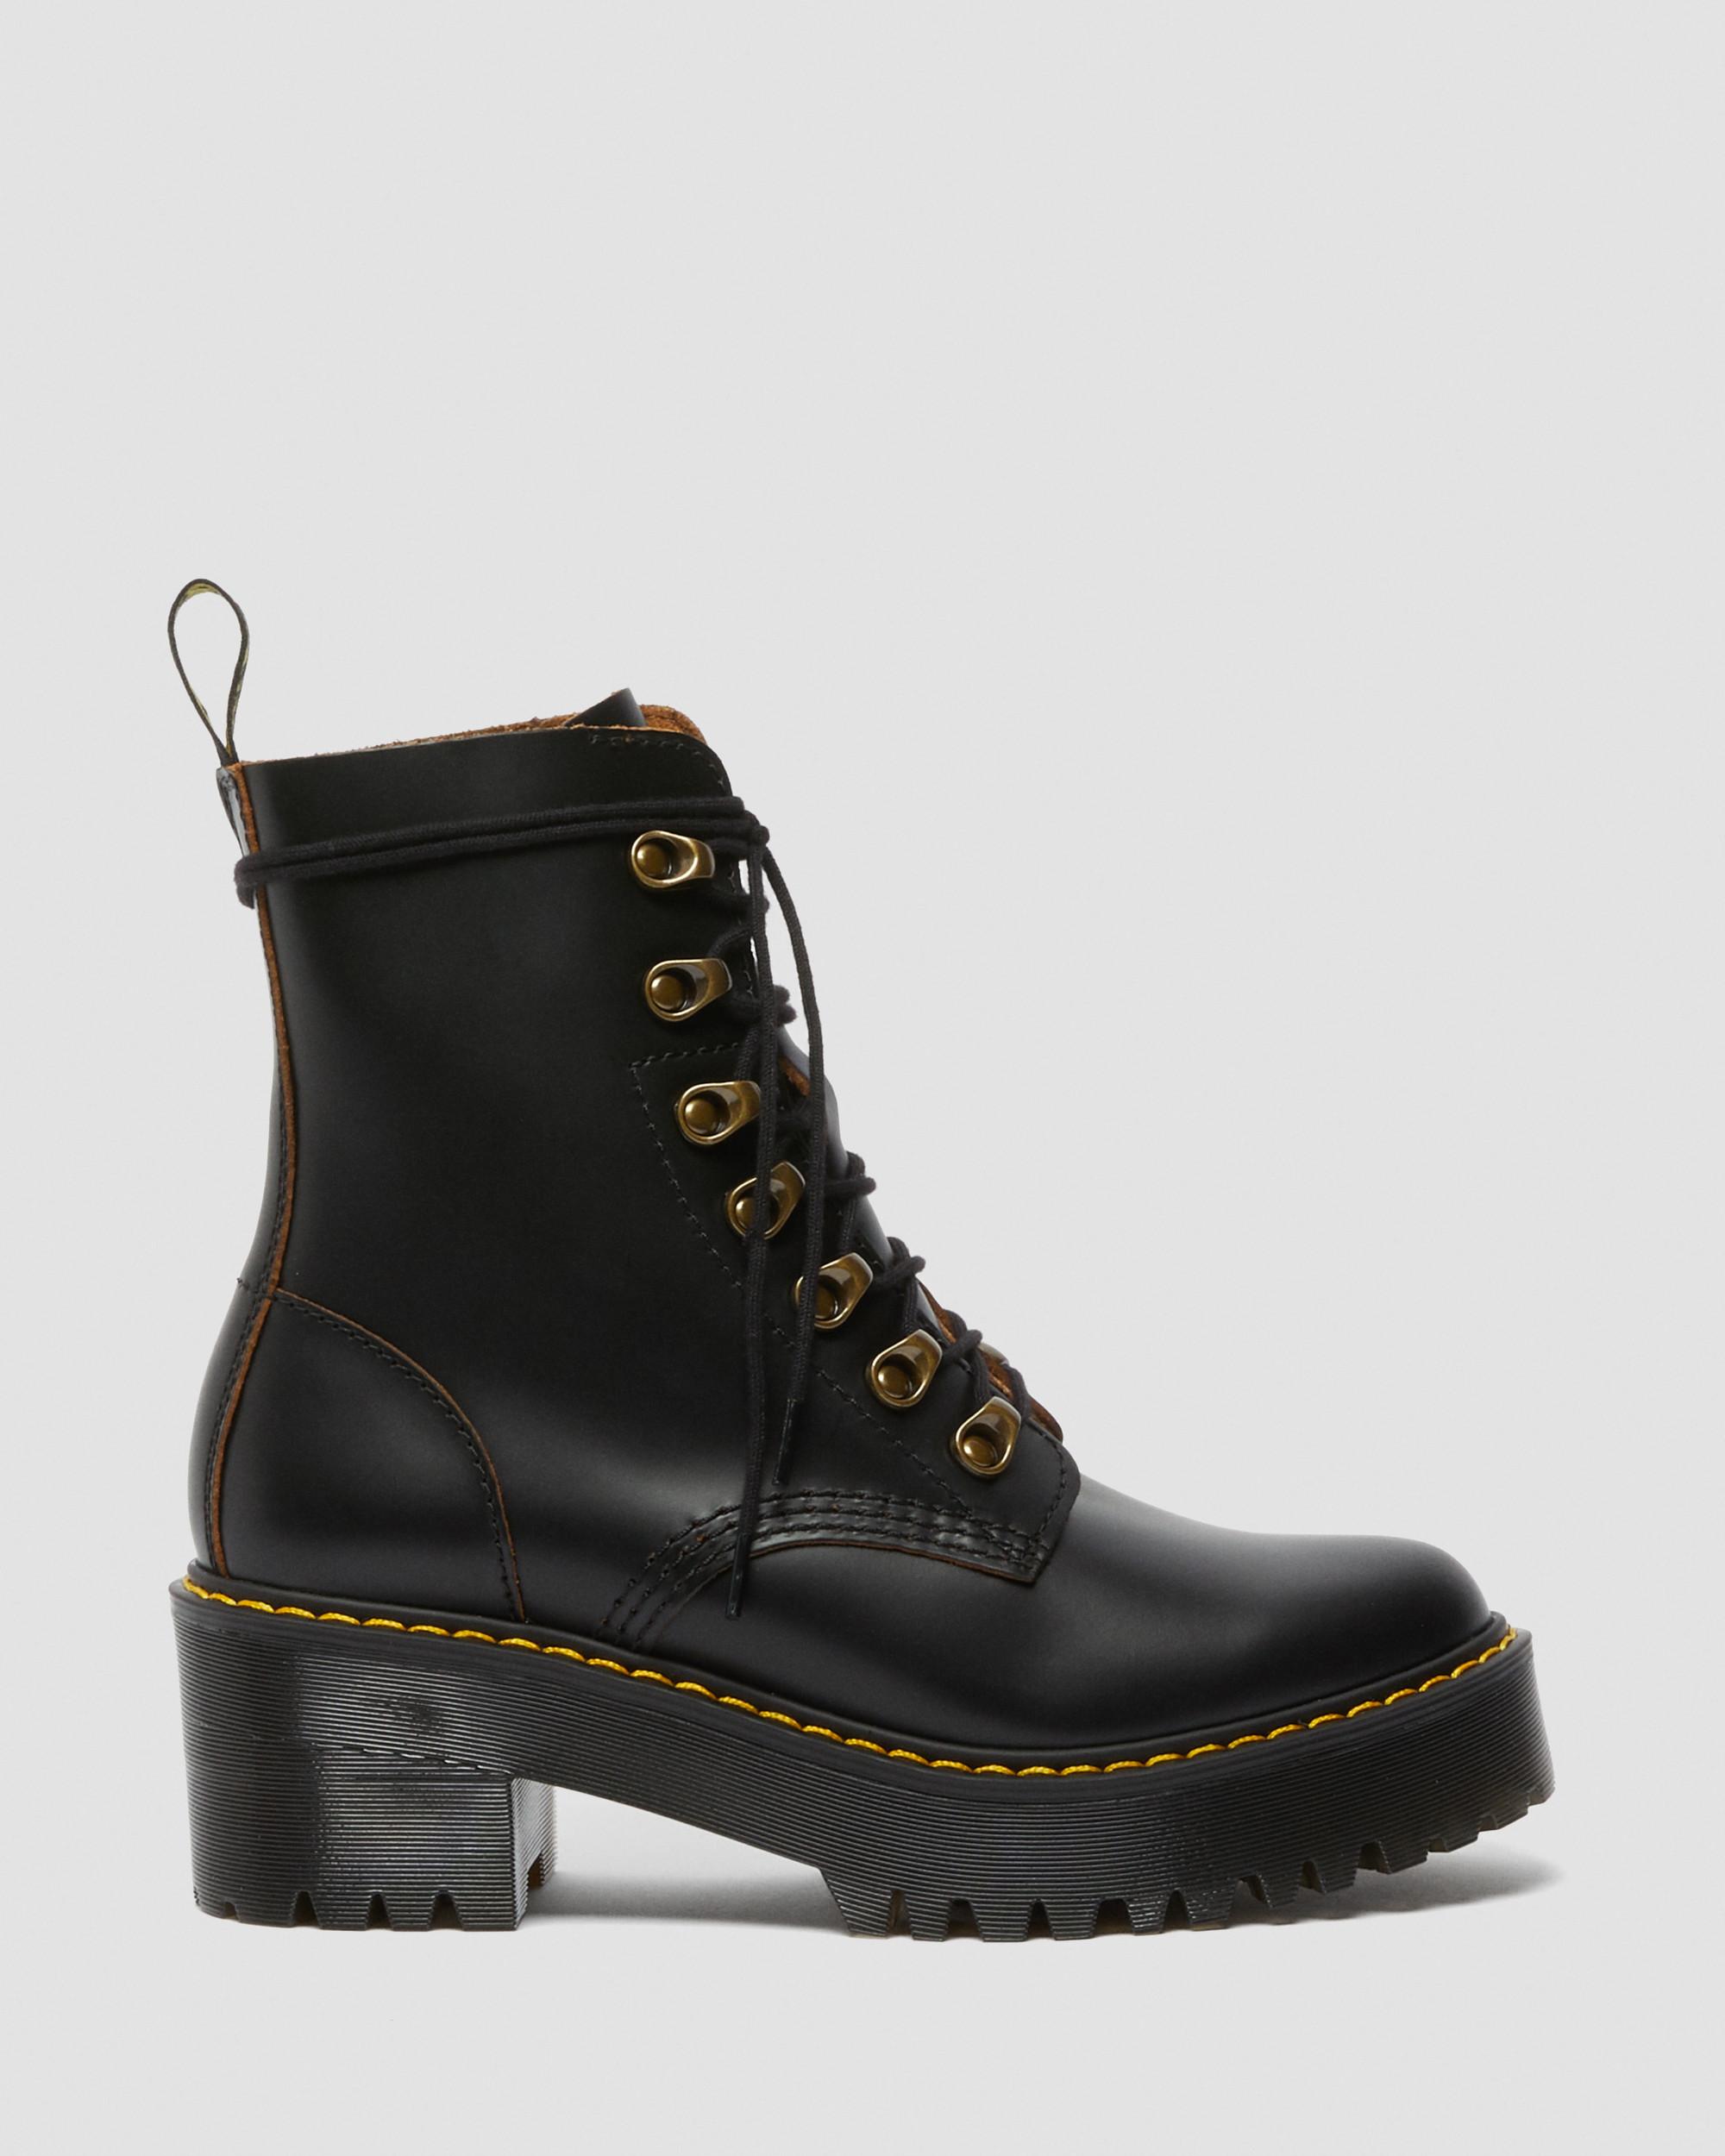 Leona Women's Vintage Smooth Leather Heeled Boots in Black | Dr. Martens